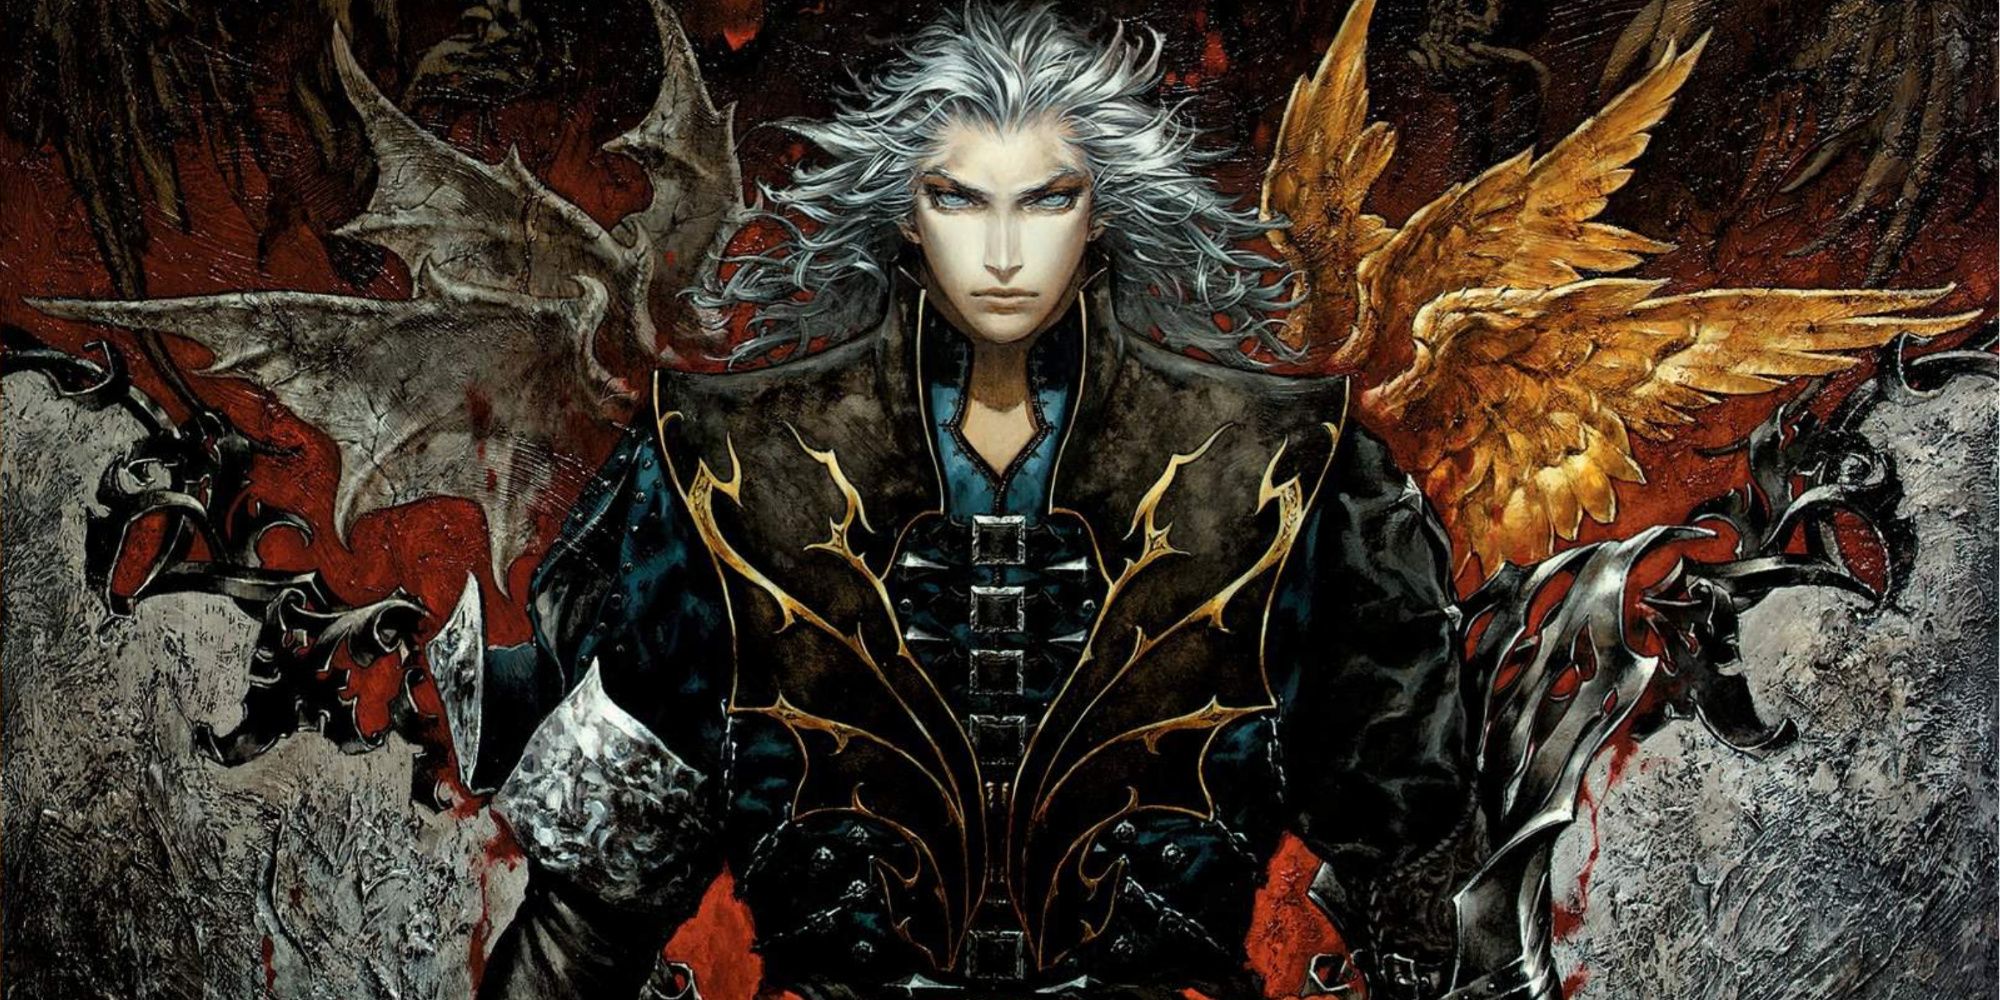 Promo art featuring Hector in Castlevania Curse of Darkness